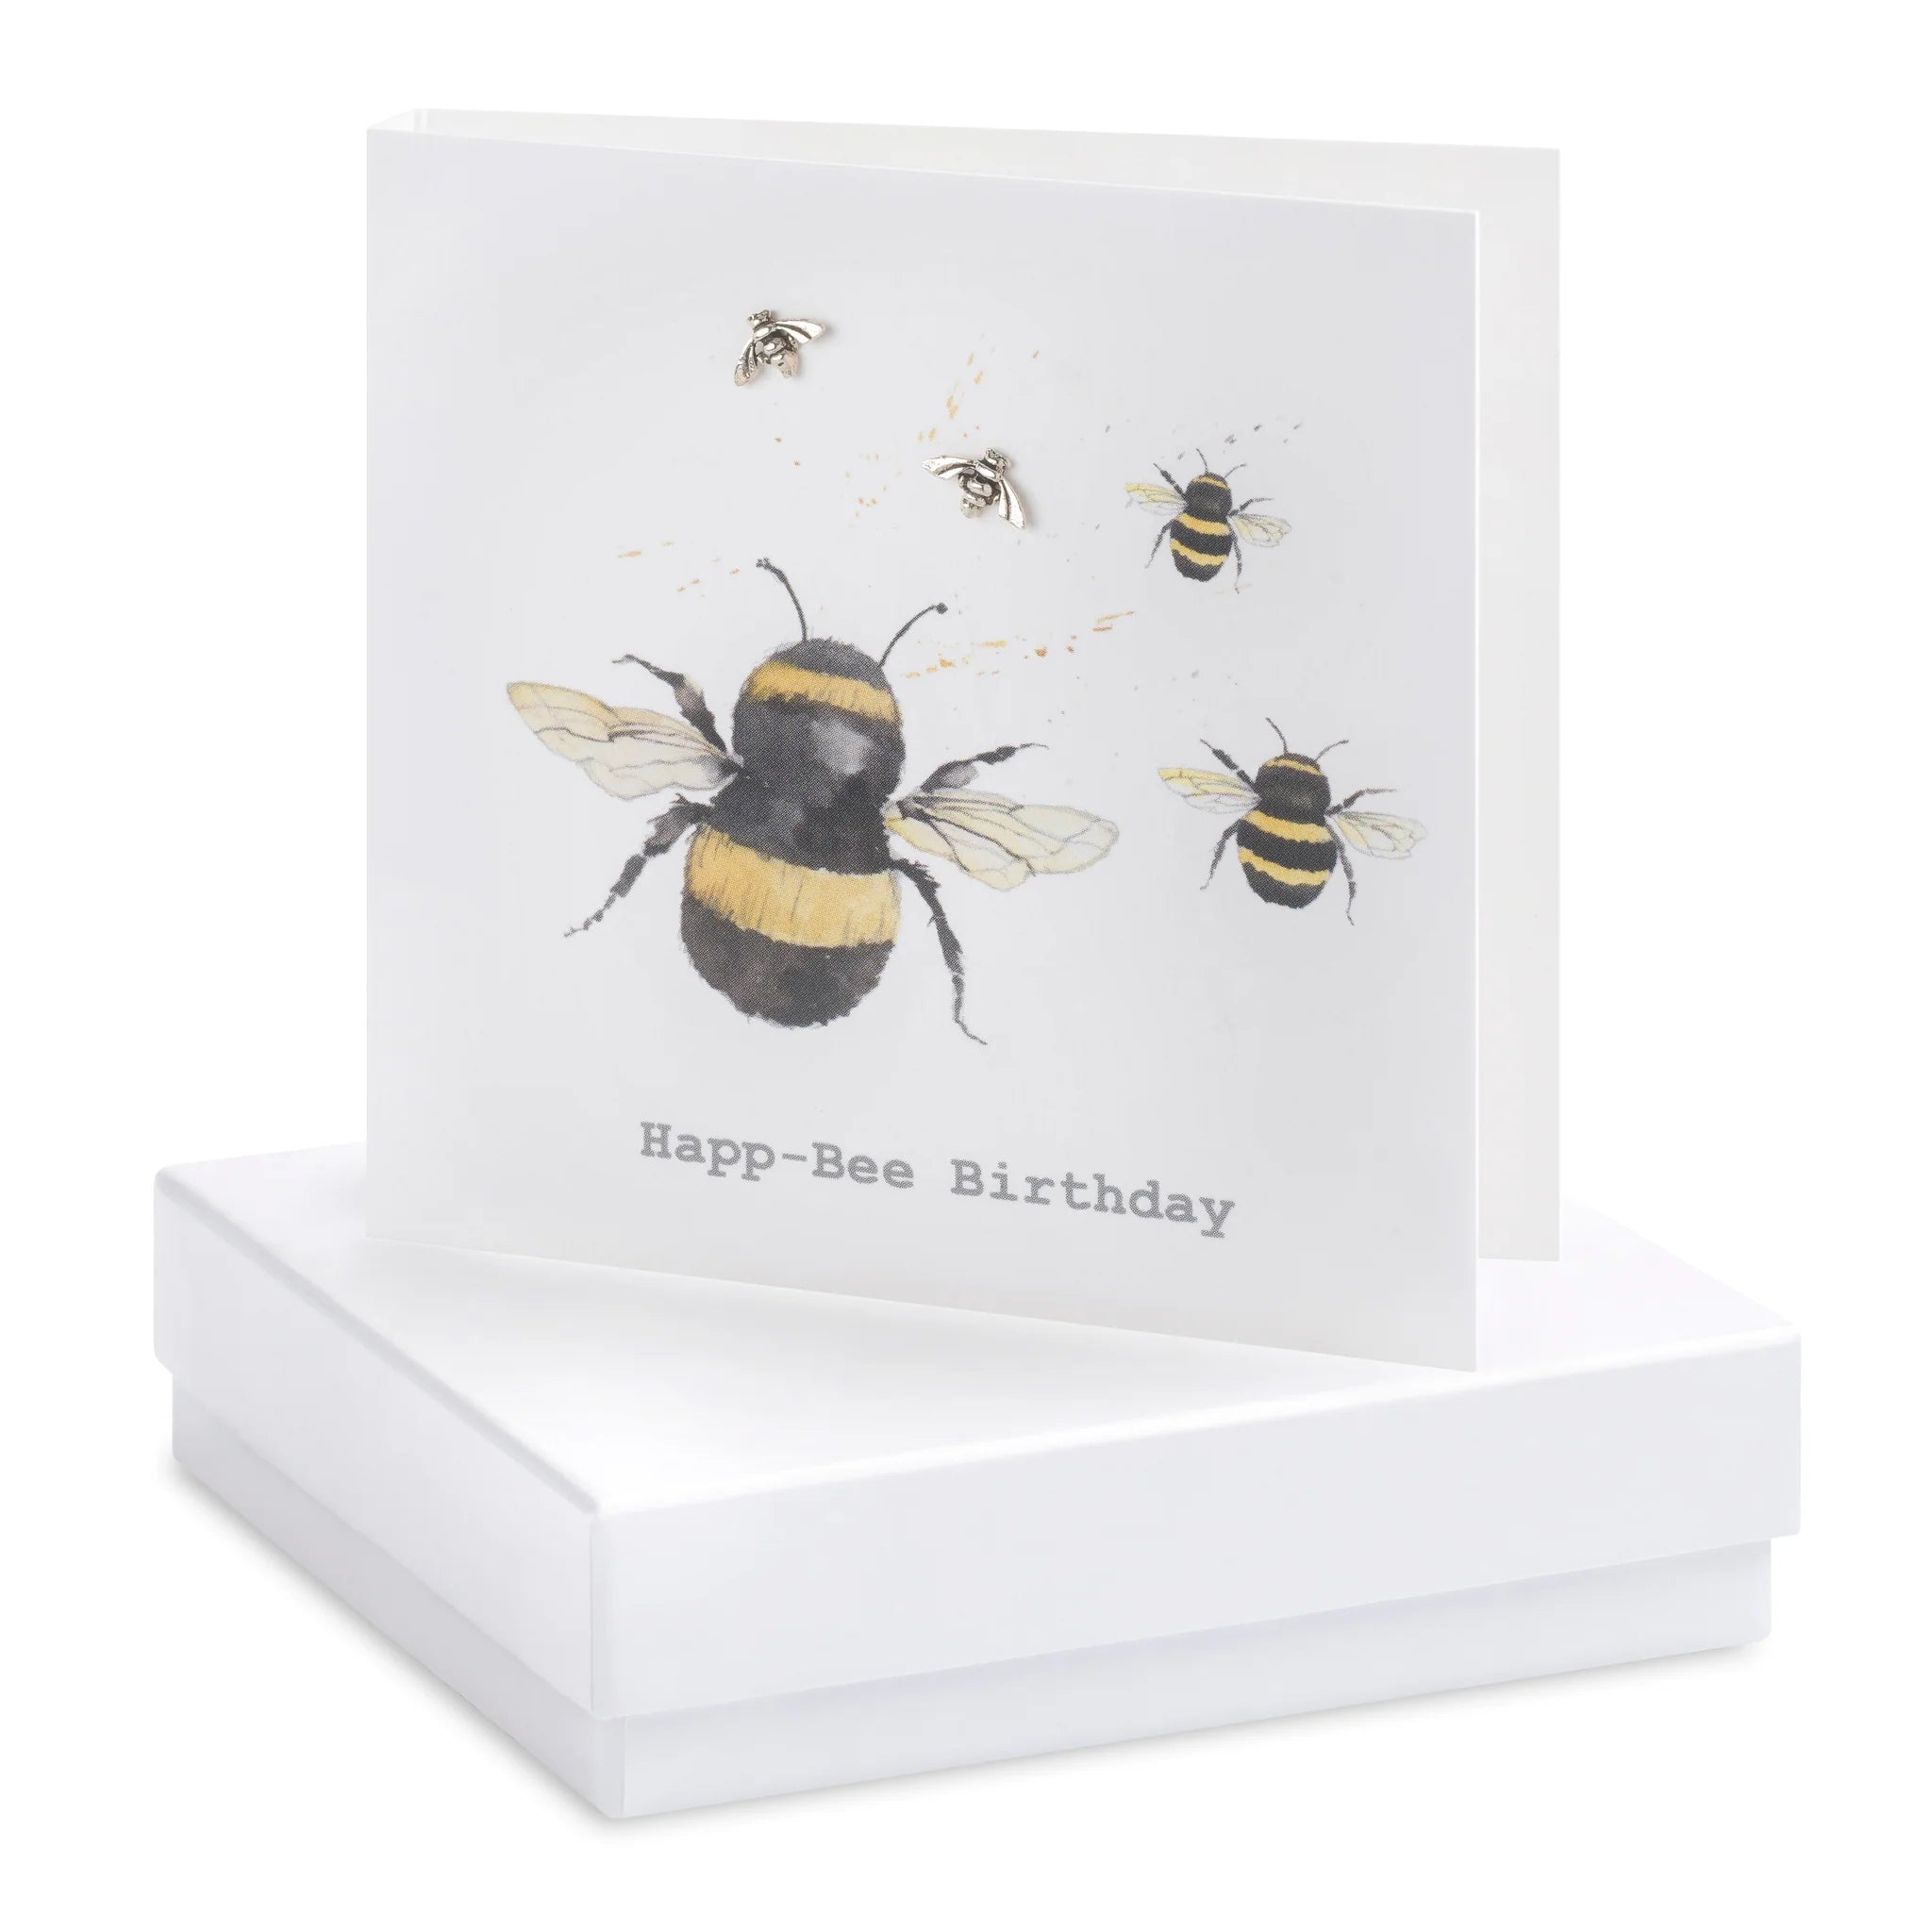 Crumble & Core | Happ-Bee Birthday Card with Earrings in a White Box by Weirs of Baggot St